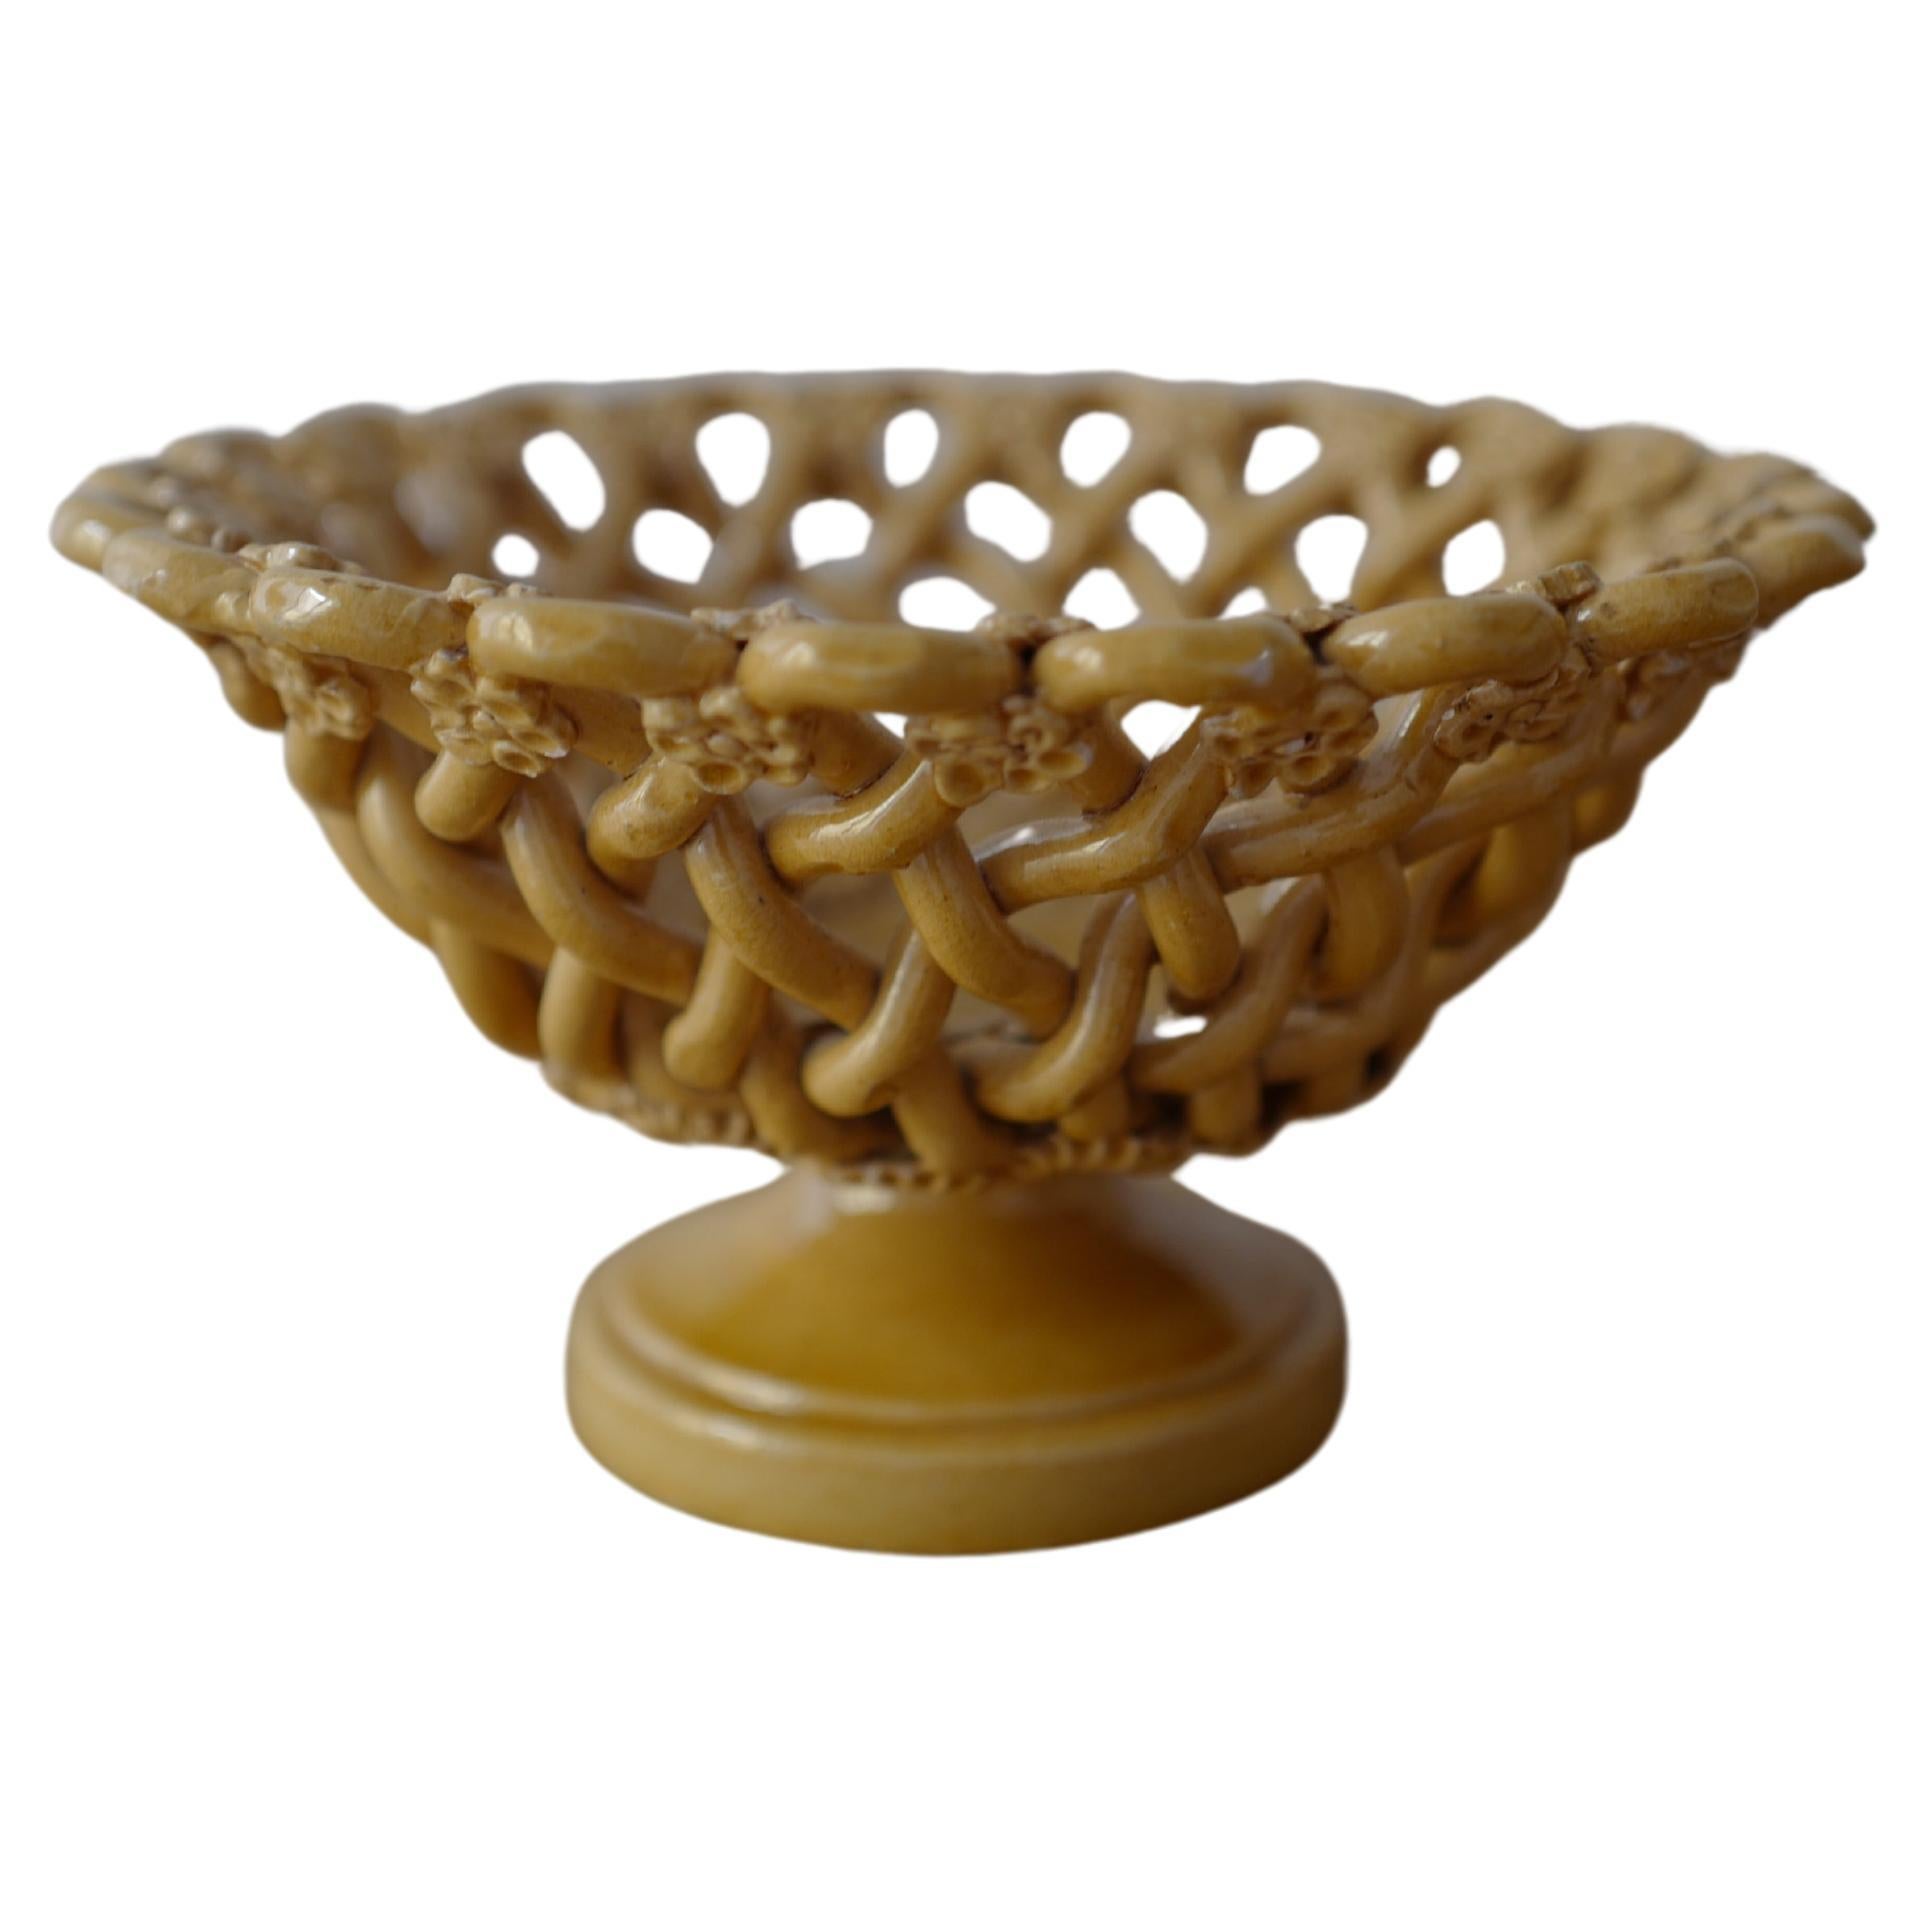 French Midcentury Woven Ceramic Yellow Bowl by Pichon a Uzes For Sale